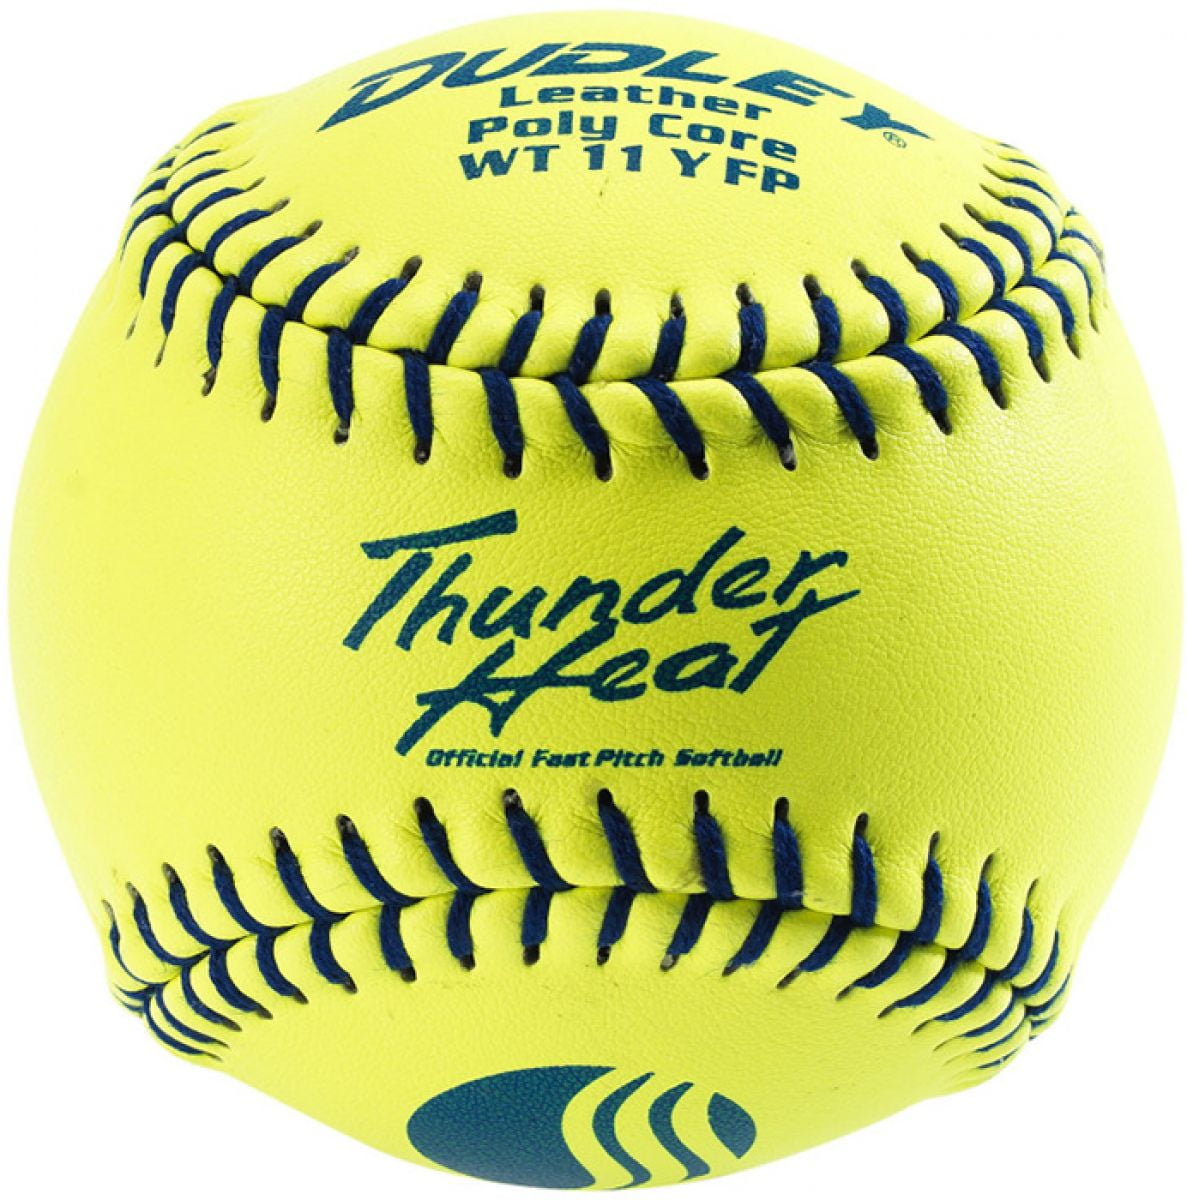 NEW PAIR OF 2 SPALDING DUDLEY THUNDER HEAT RED STITCH LEATHER COVERED SOFTBALLS 